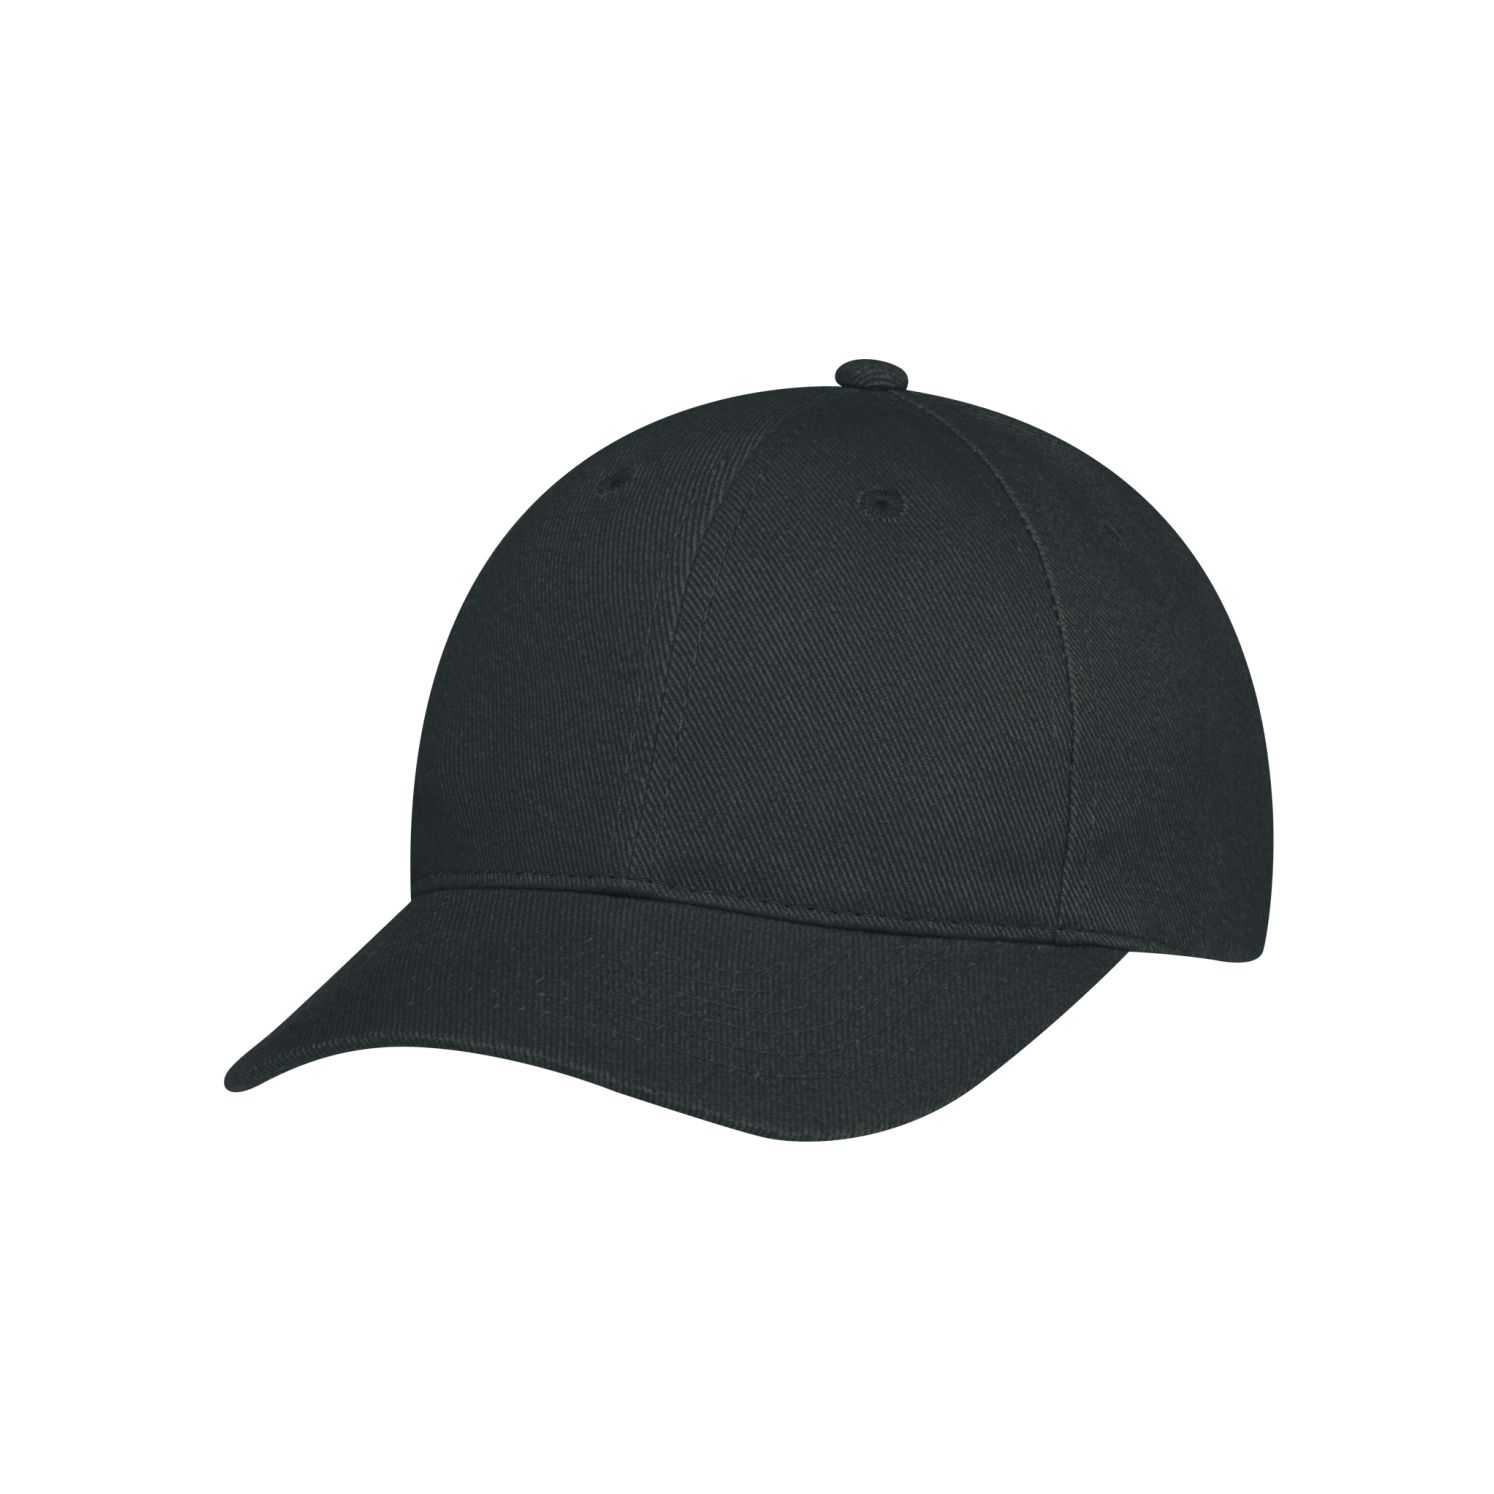 AJM Heavyweight Brushed Cotton Drill 6 Panel Constructed Contour Hat #2C390M Black